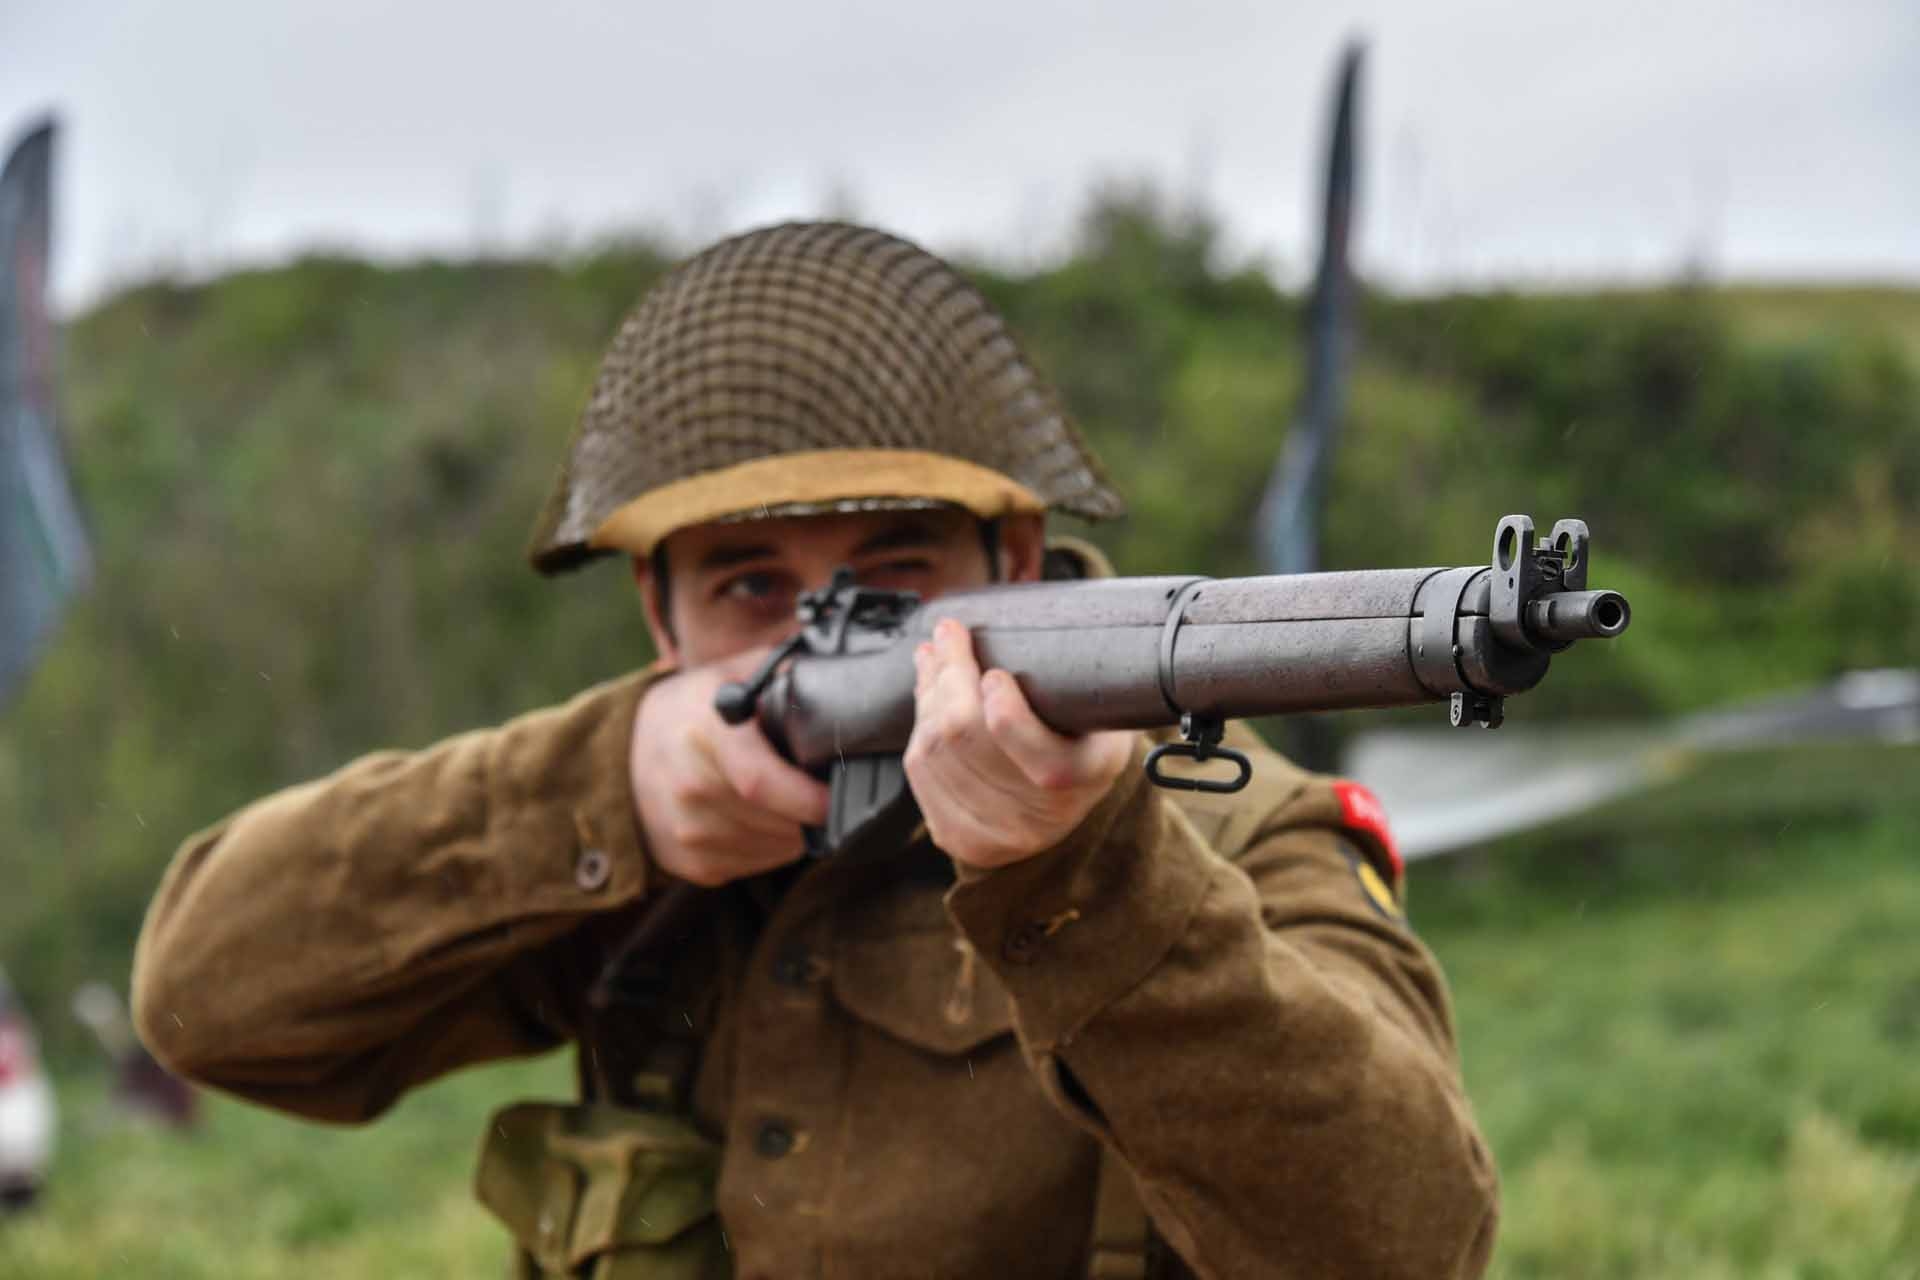 The Lee-Enfield No.4, the “utilitarian” rifle